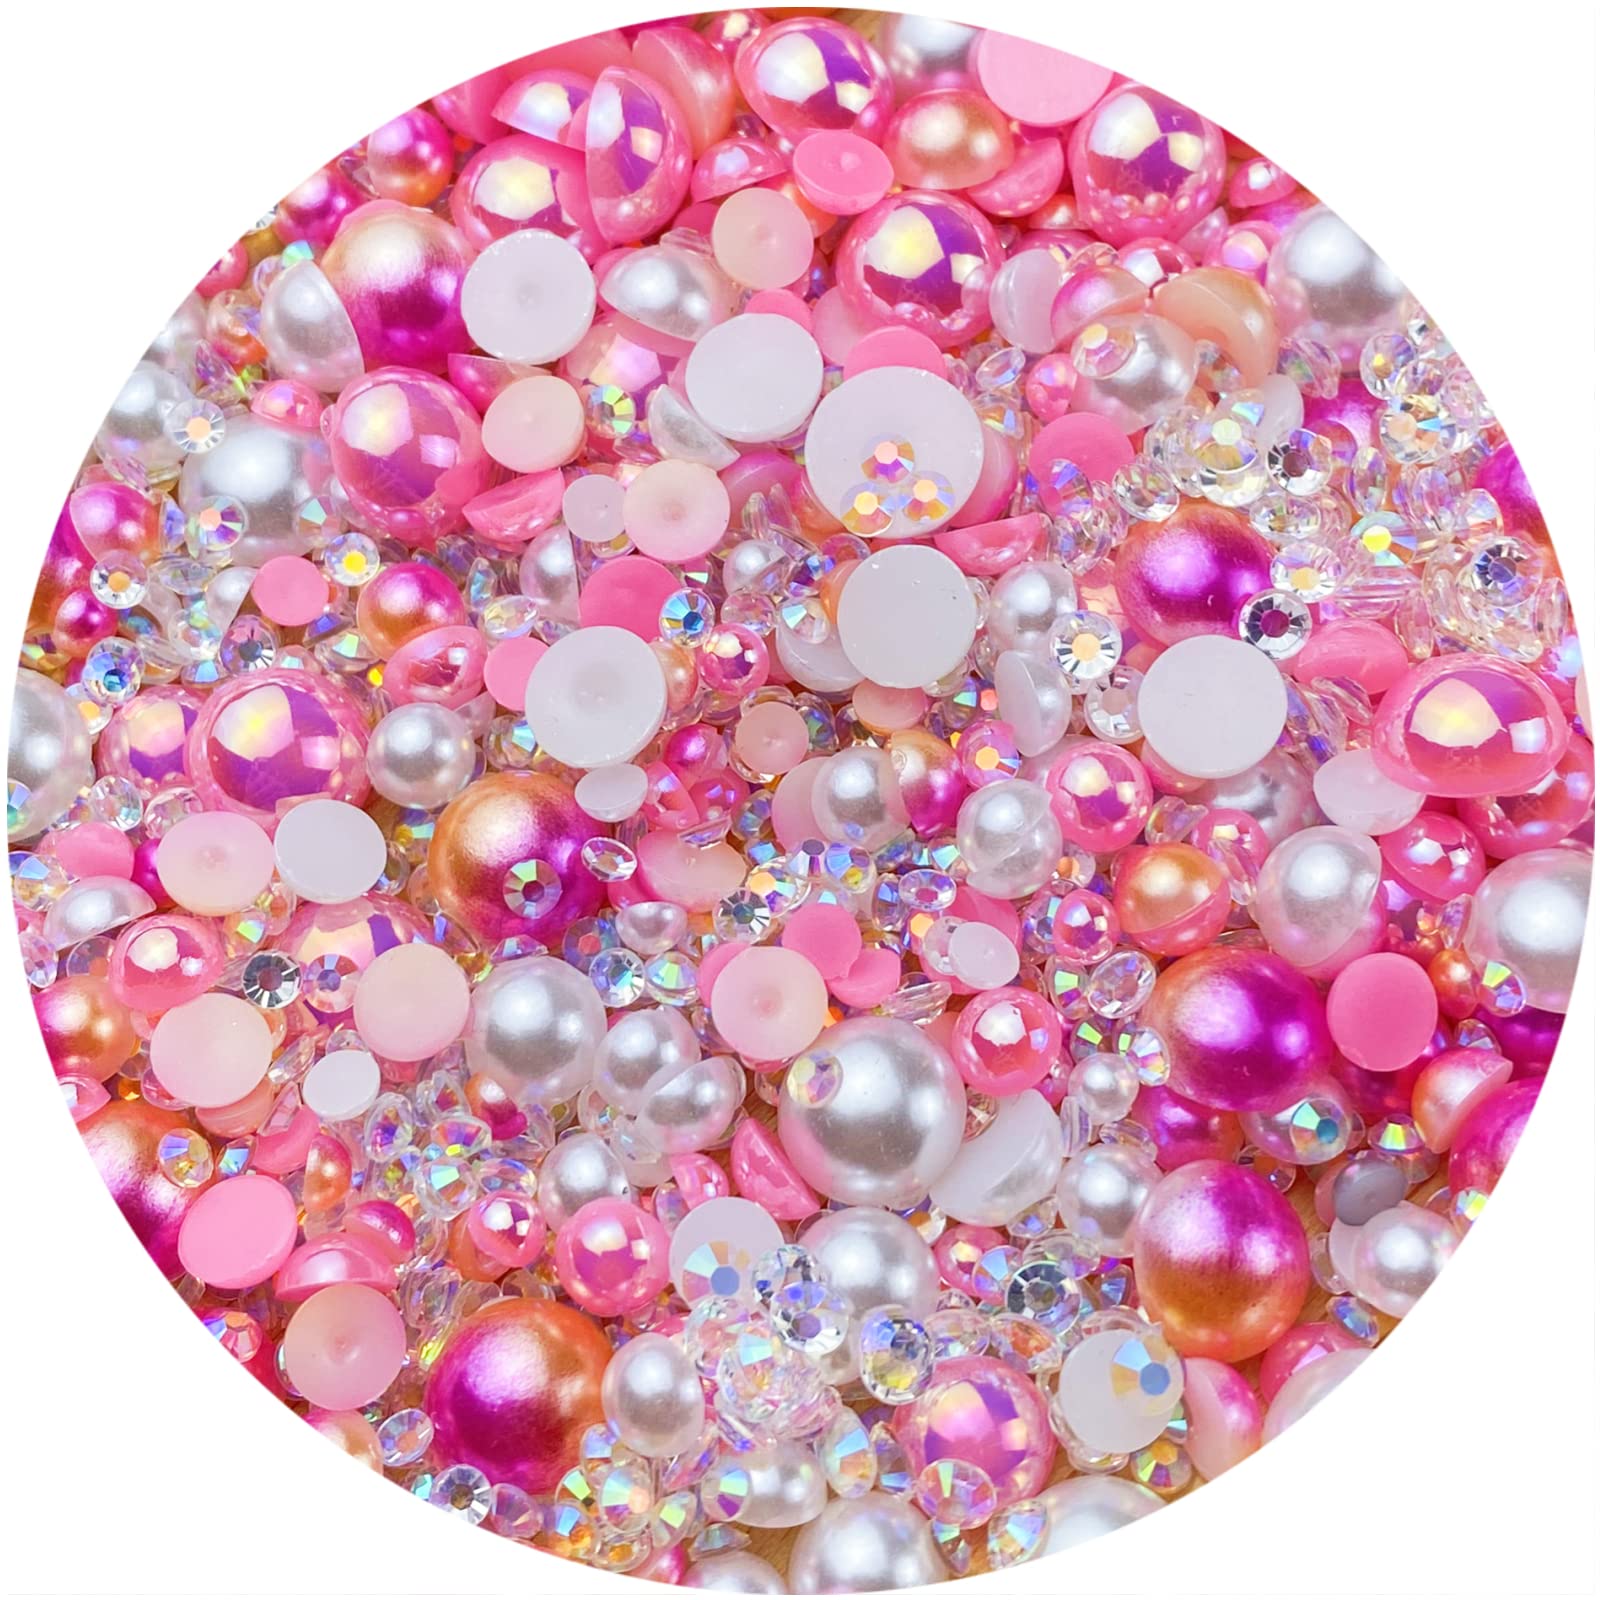  Towenm 60g Mix Pearls and Rhinestones for Crafts, Flatback  Rhinestones and Half Pearls for Tumblers Shoes Face Nail Art, 2mm-10mm Mix  Pearl Rhinestones for Bedazzling, Pink, Purple